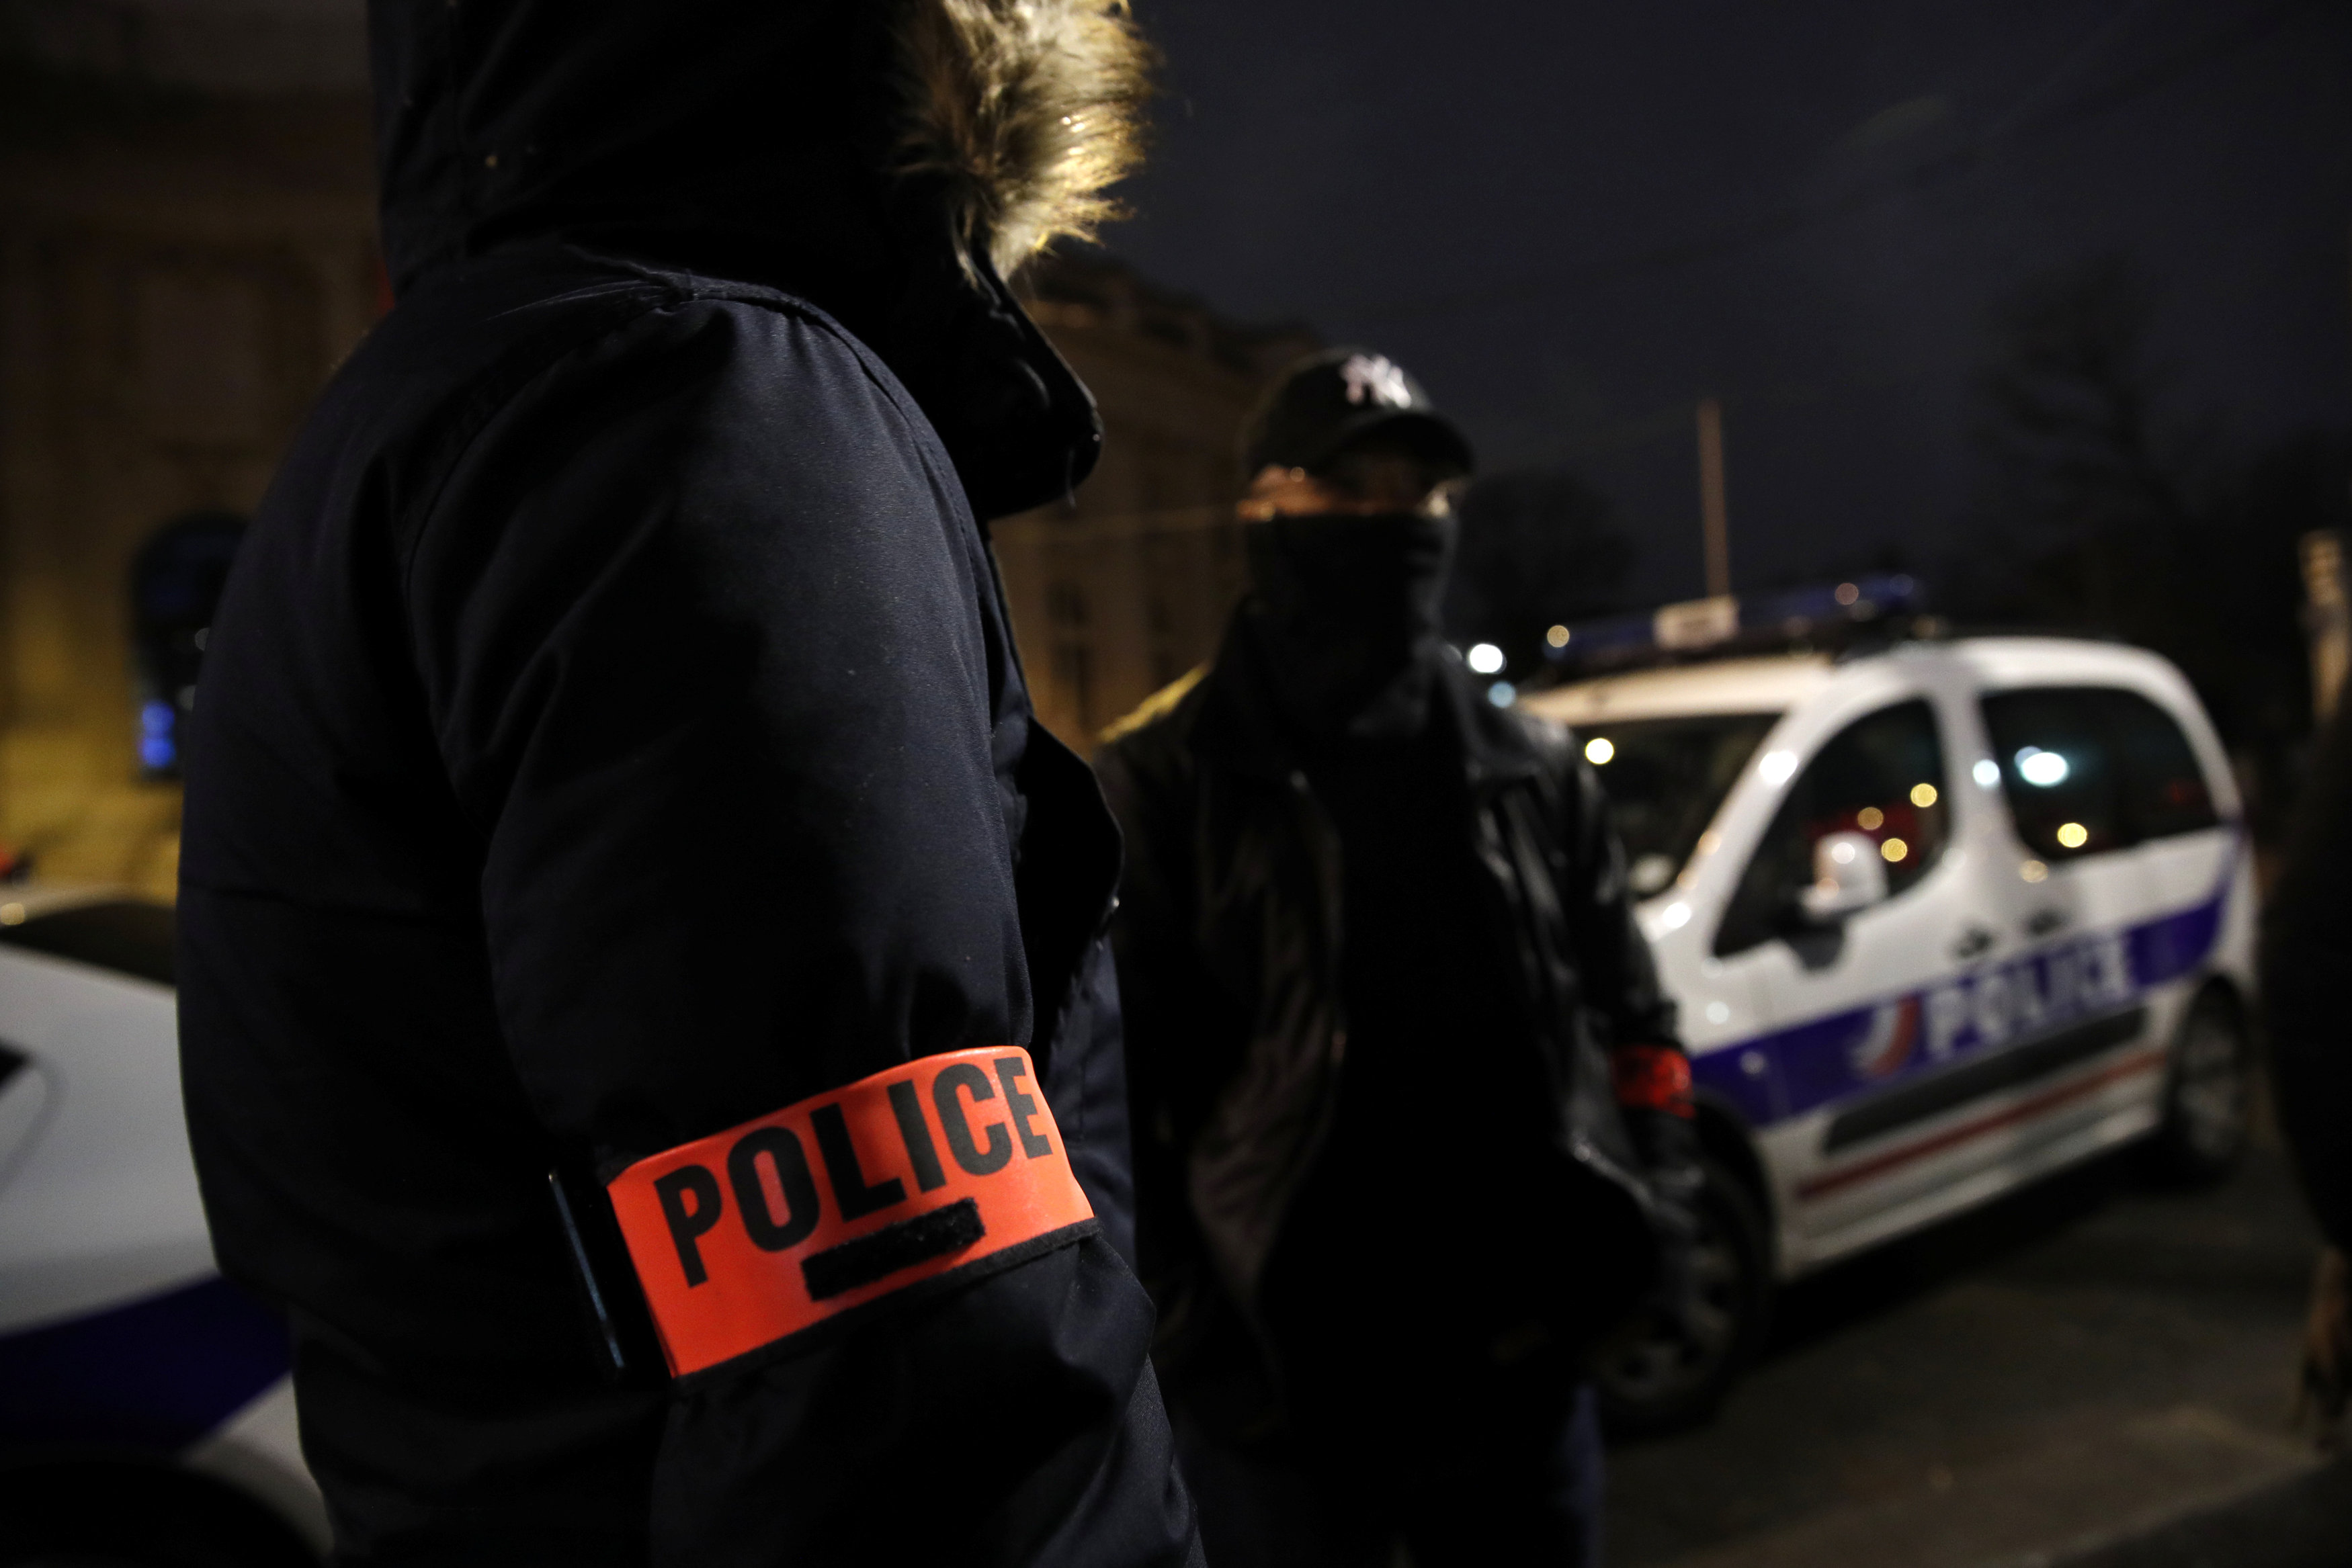 2018-12-20T222140Z_1605126843_RC12C80C1AA0_RTRMADP_3_FRANCE-PROTESTS-POLICE